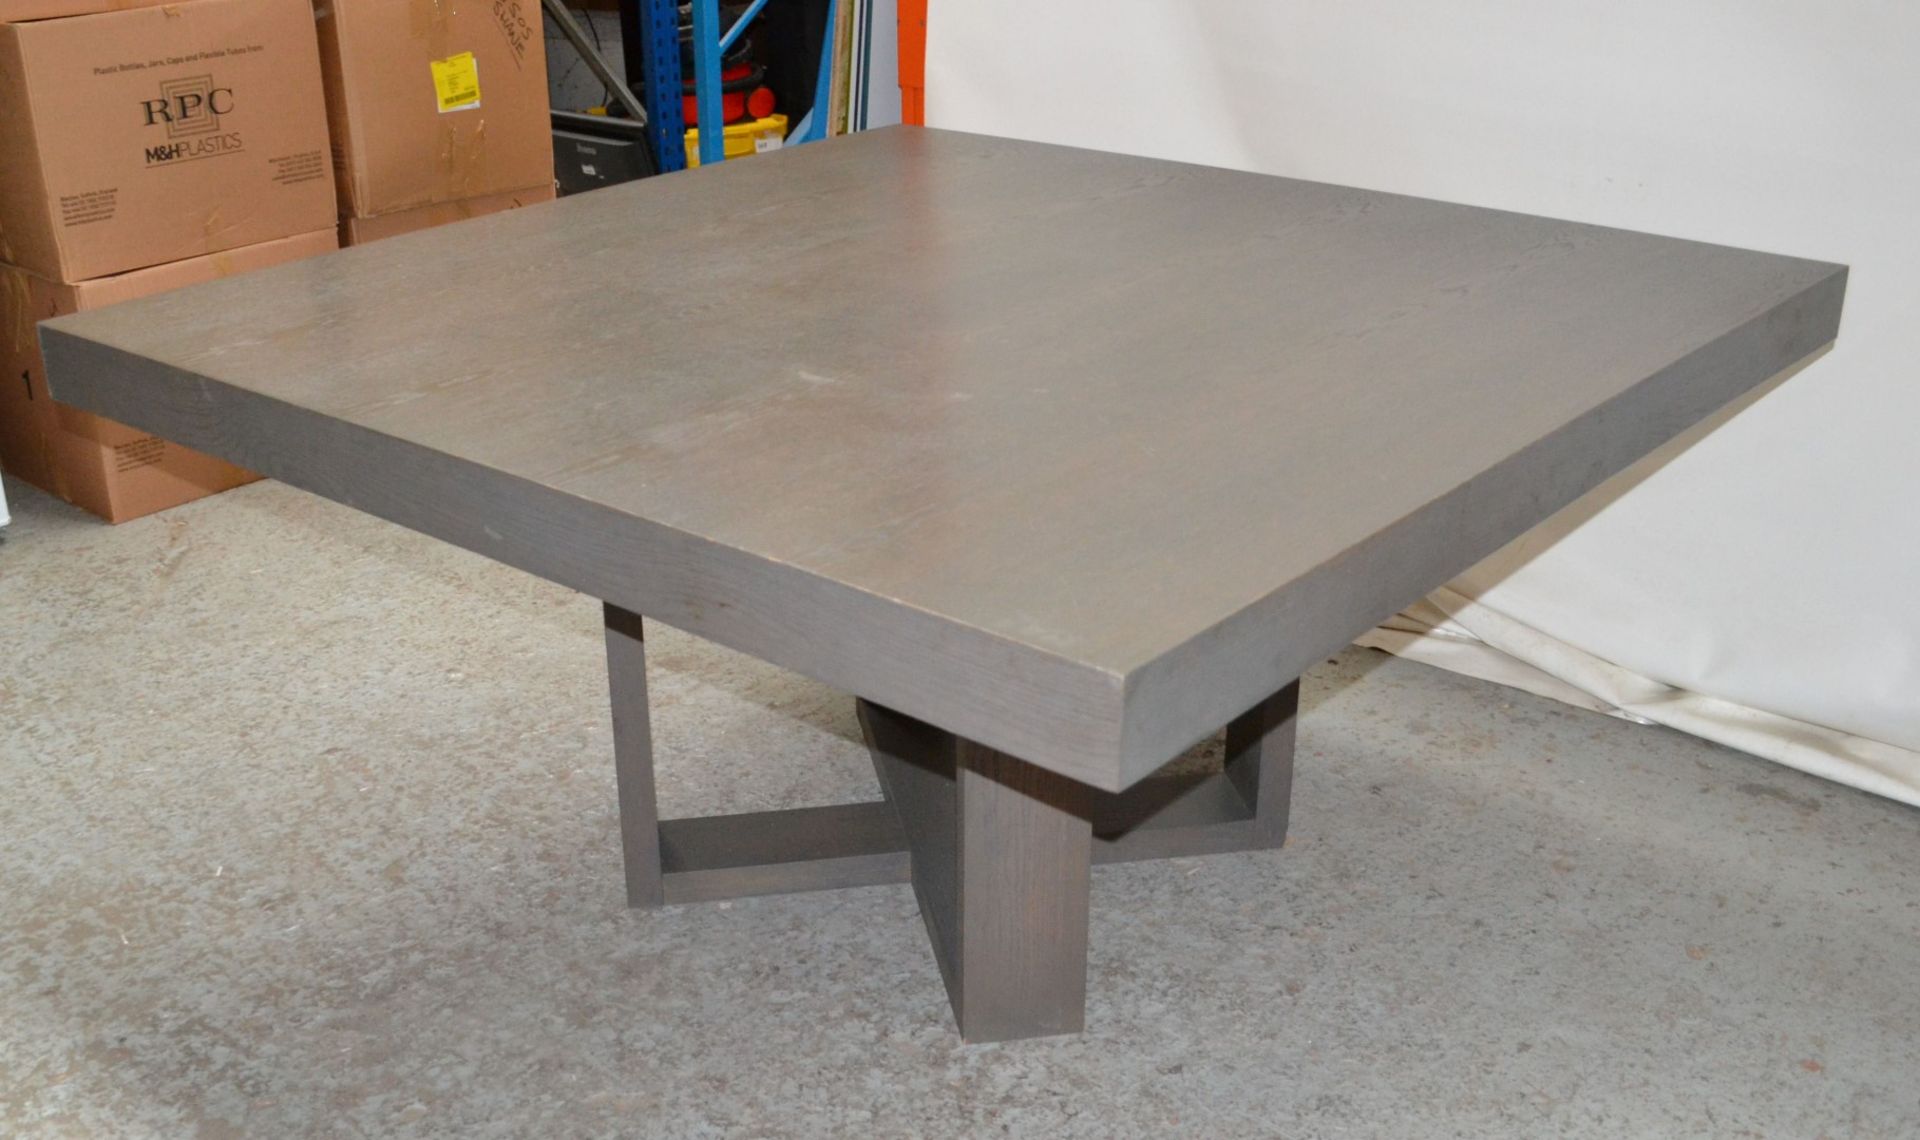 1 x Large Square Wooden Table in Grey Oak Coloured Finish - CL314 - Location: Altrincham WA14 - *NO - Image 4 of 10